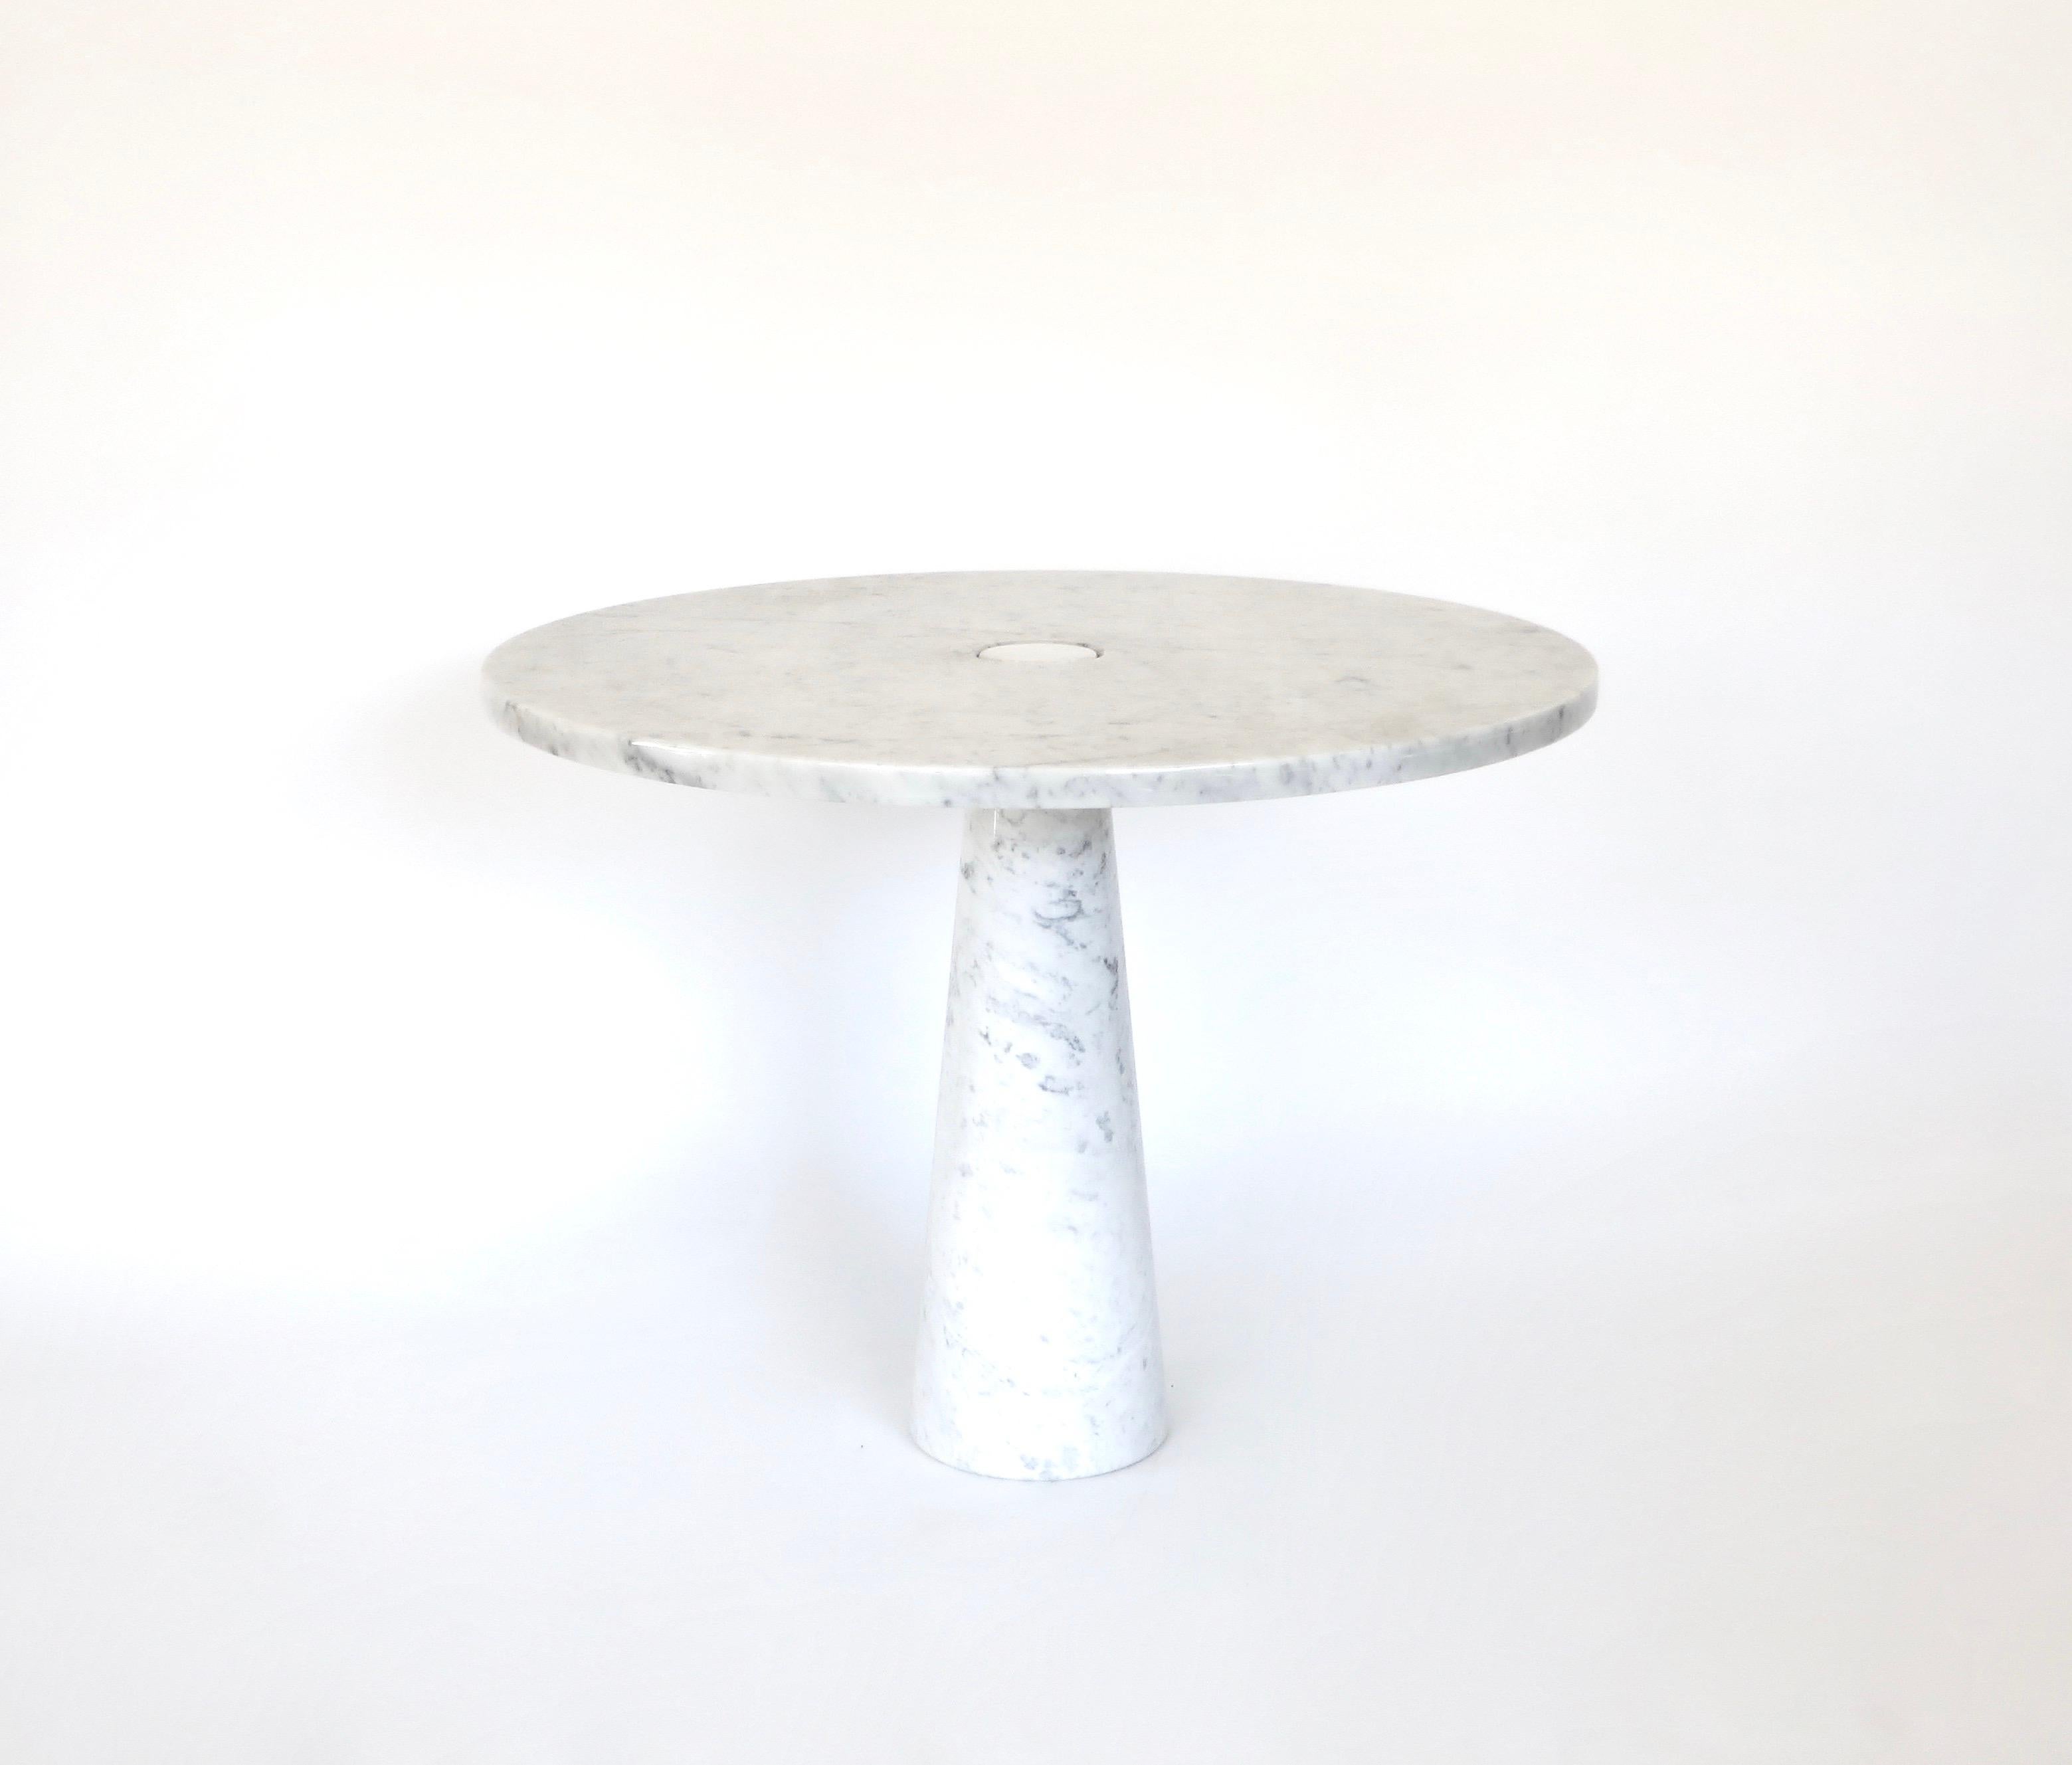 Angelo Mangiarotti vintage Eros Carrara marble dining or center table. 
This example has the iconic grey veining of Carrara marble.
The structural design of the “Eros” tables involves gravity-based embedding between the top and leg made possible